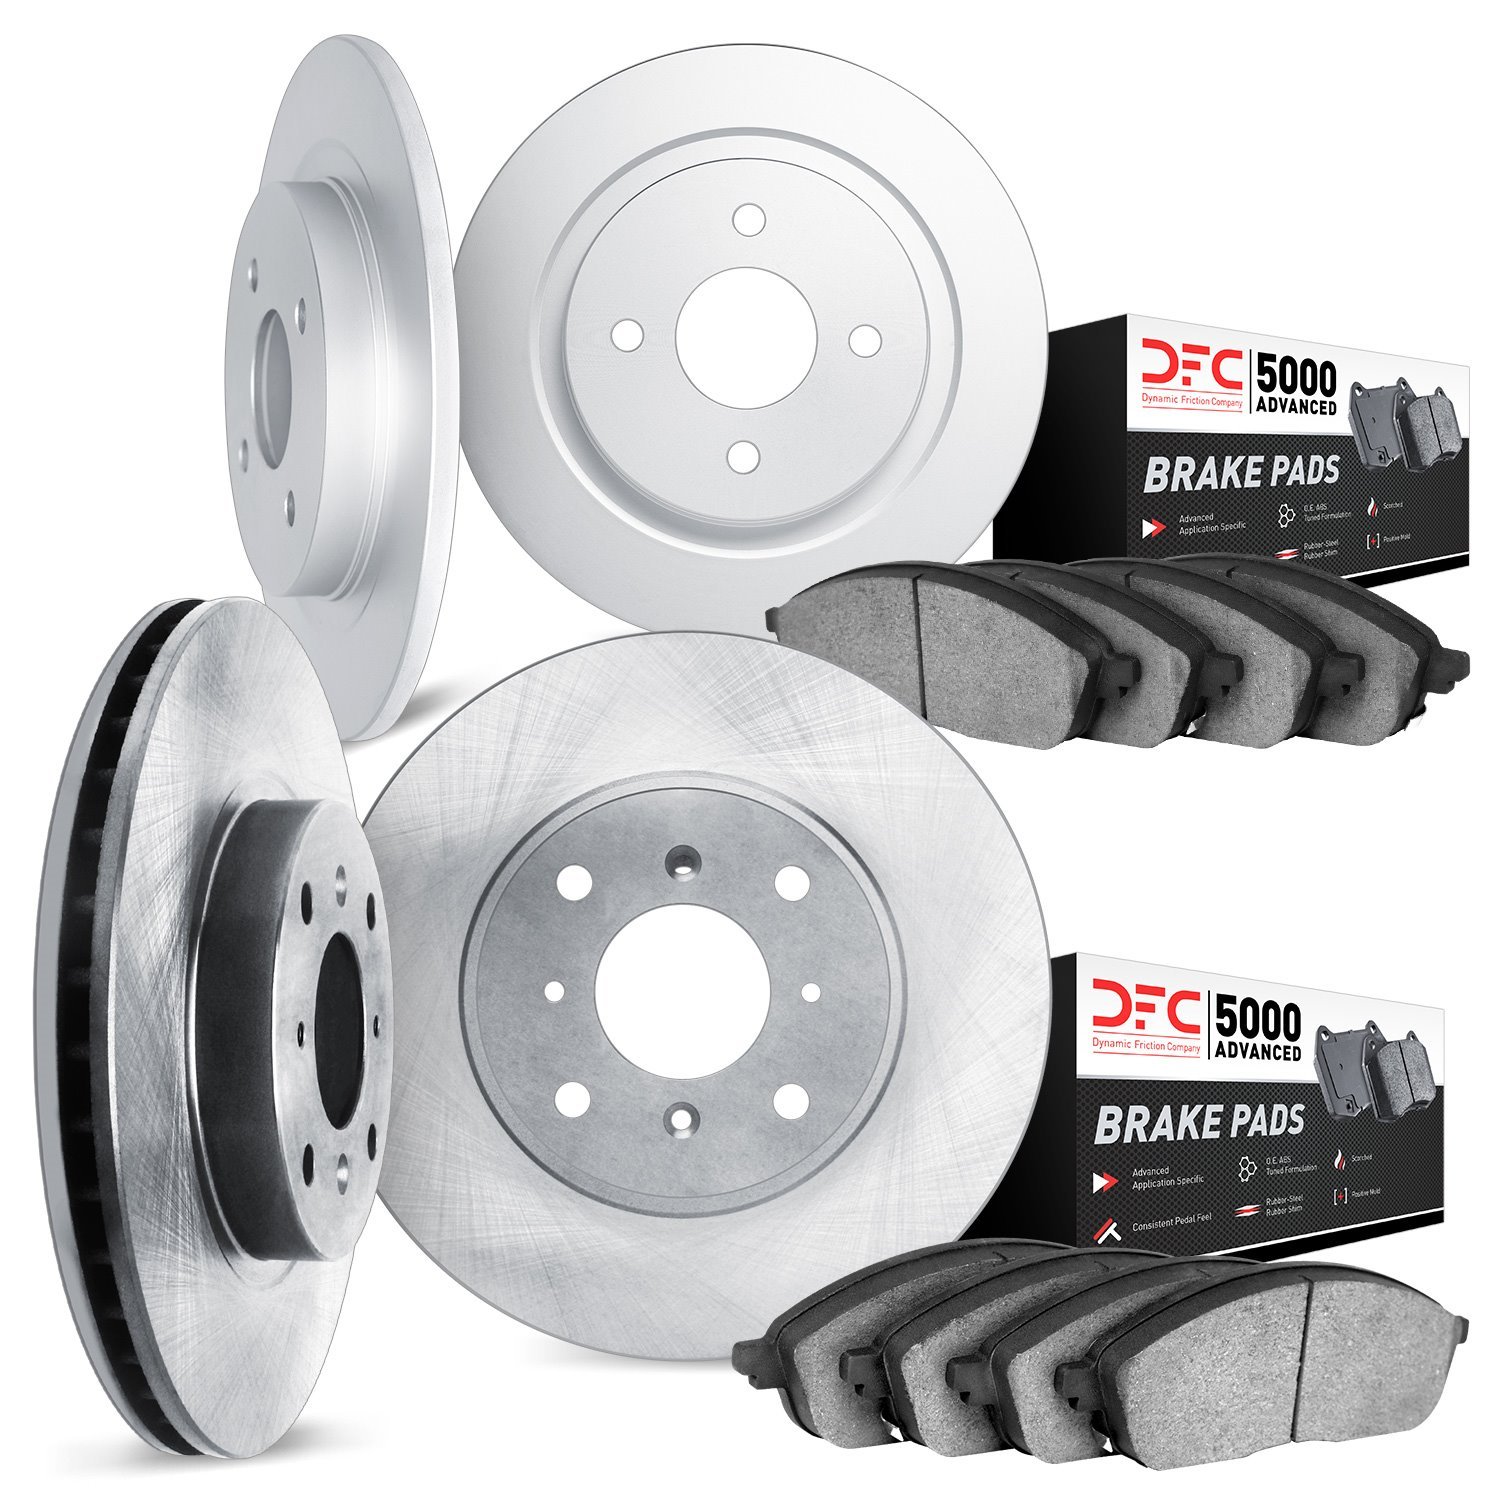 6504-65017 Brake Rotors w/5000 Advanced Brake Pads Kit, 1985-1987 GM, Position: Front and Rear